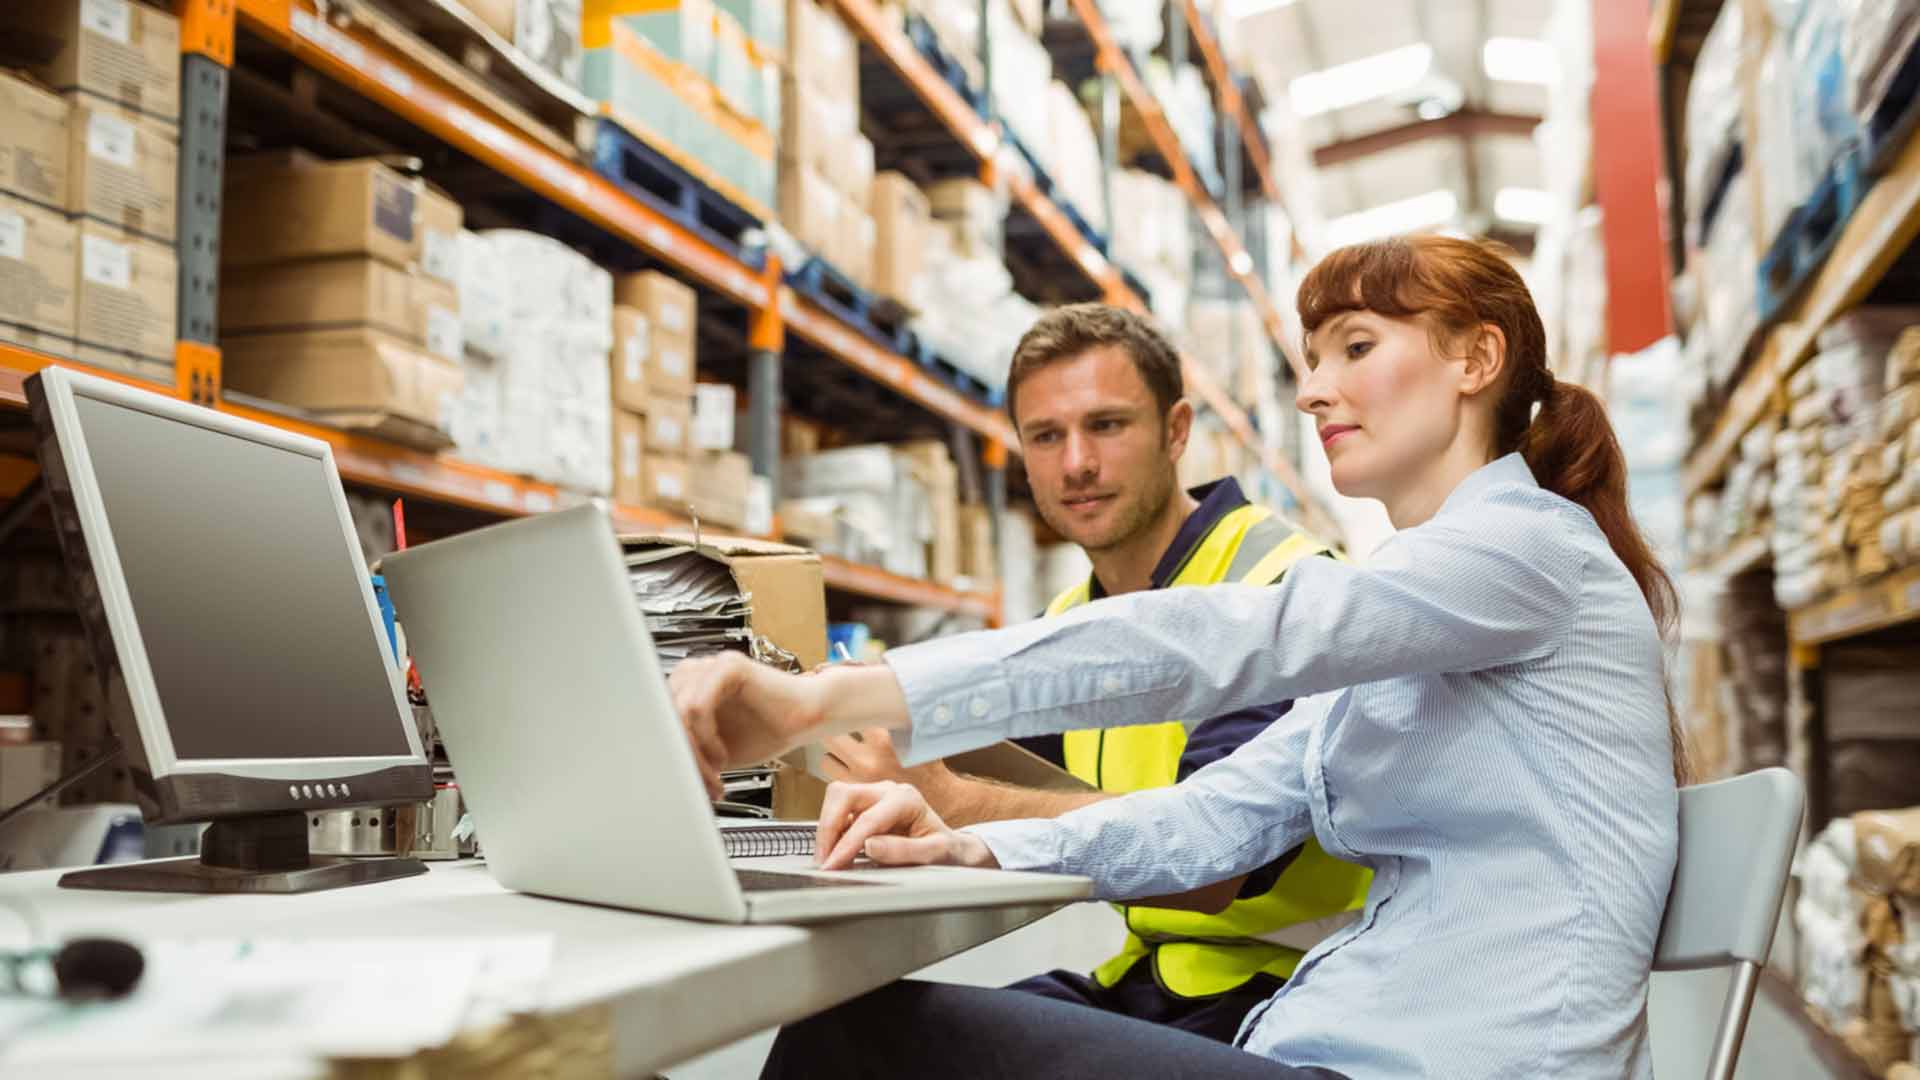 Two people view a computer in a warehouse